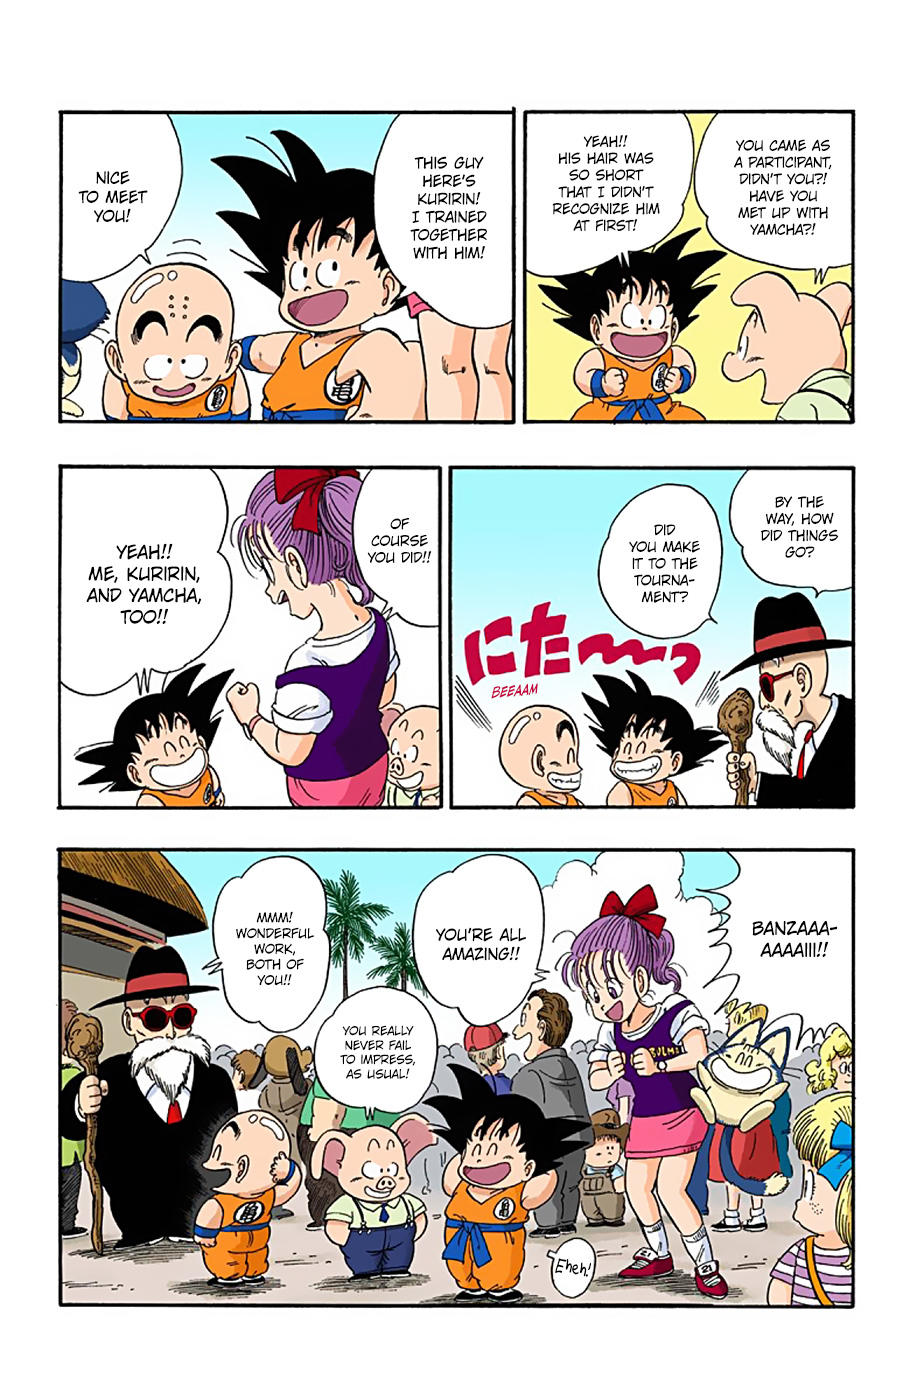 Dragon Ball - Full Color Edition Vol.3 Chapter 35: The Match-Ups Decided!! page 5 - Mangakakalot